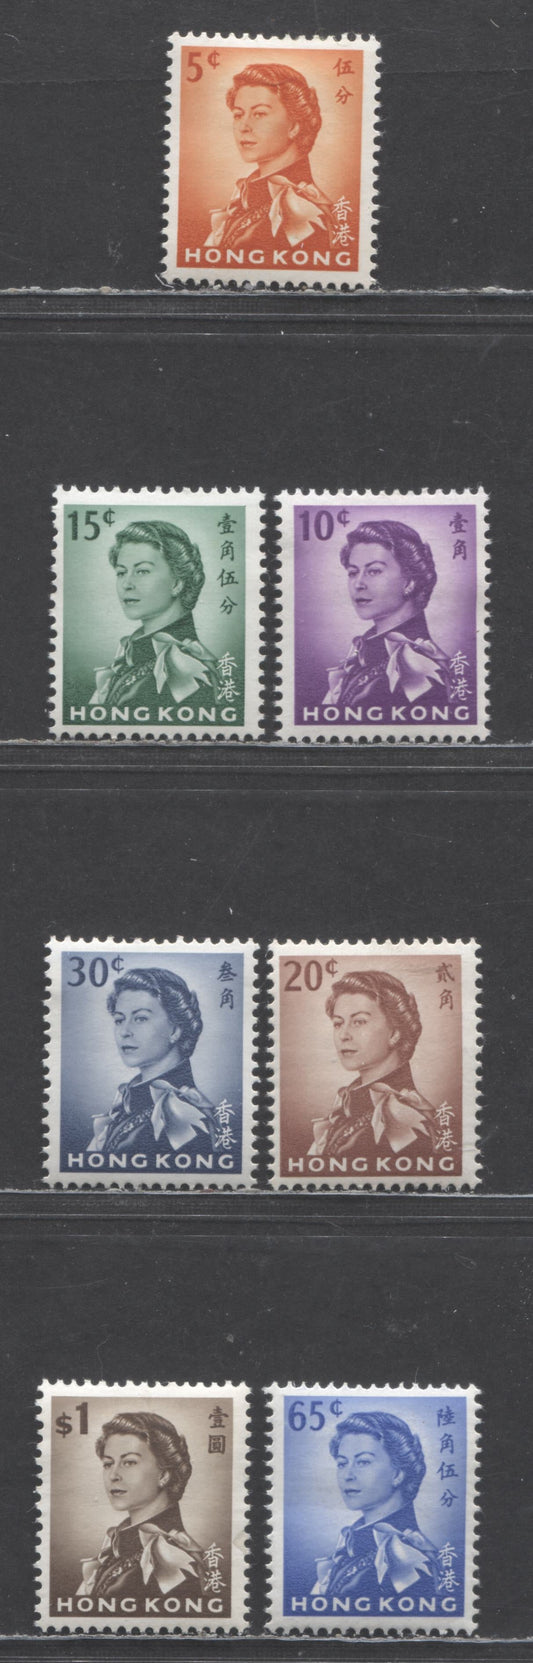 Lot 67 Hong Kong SC#203/212 1962 Angori Portrait Issue, Upright Block CA Wmk, 7 VFOG Singles, Click on Listing to See ALL Pictures, Estimated Value $25